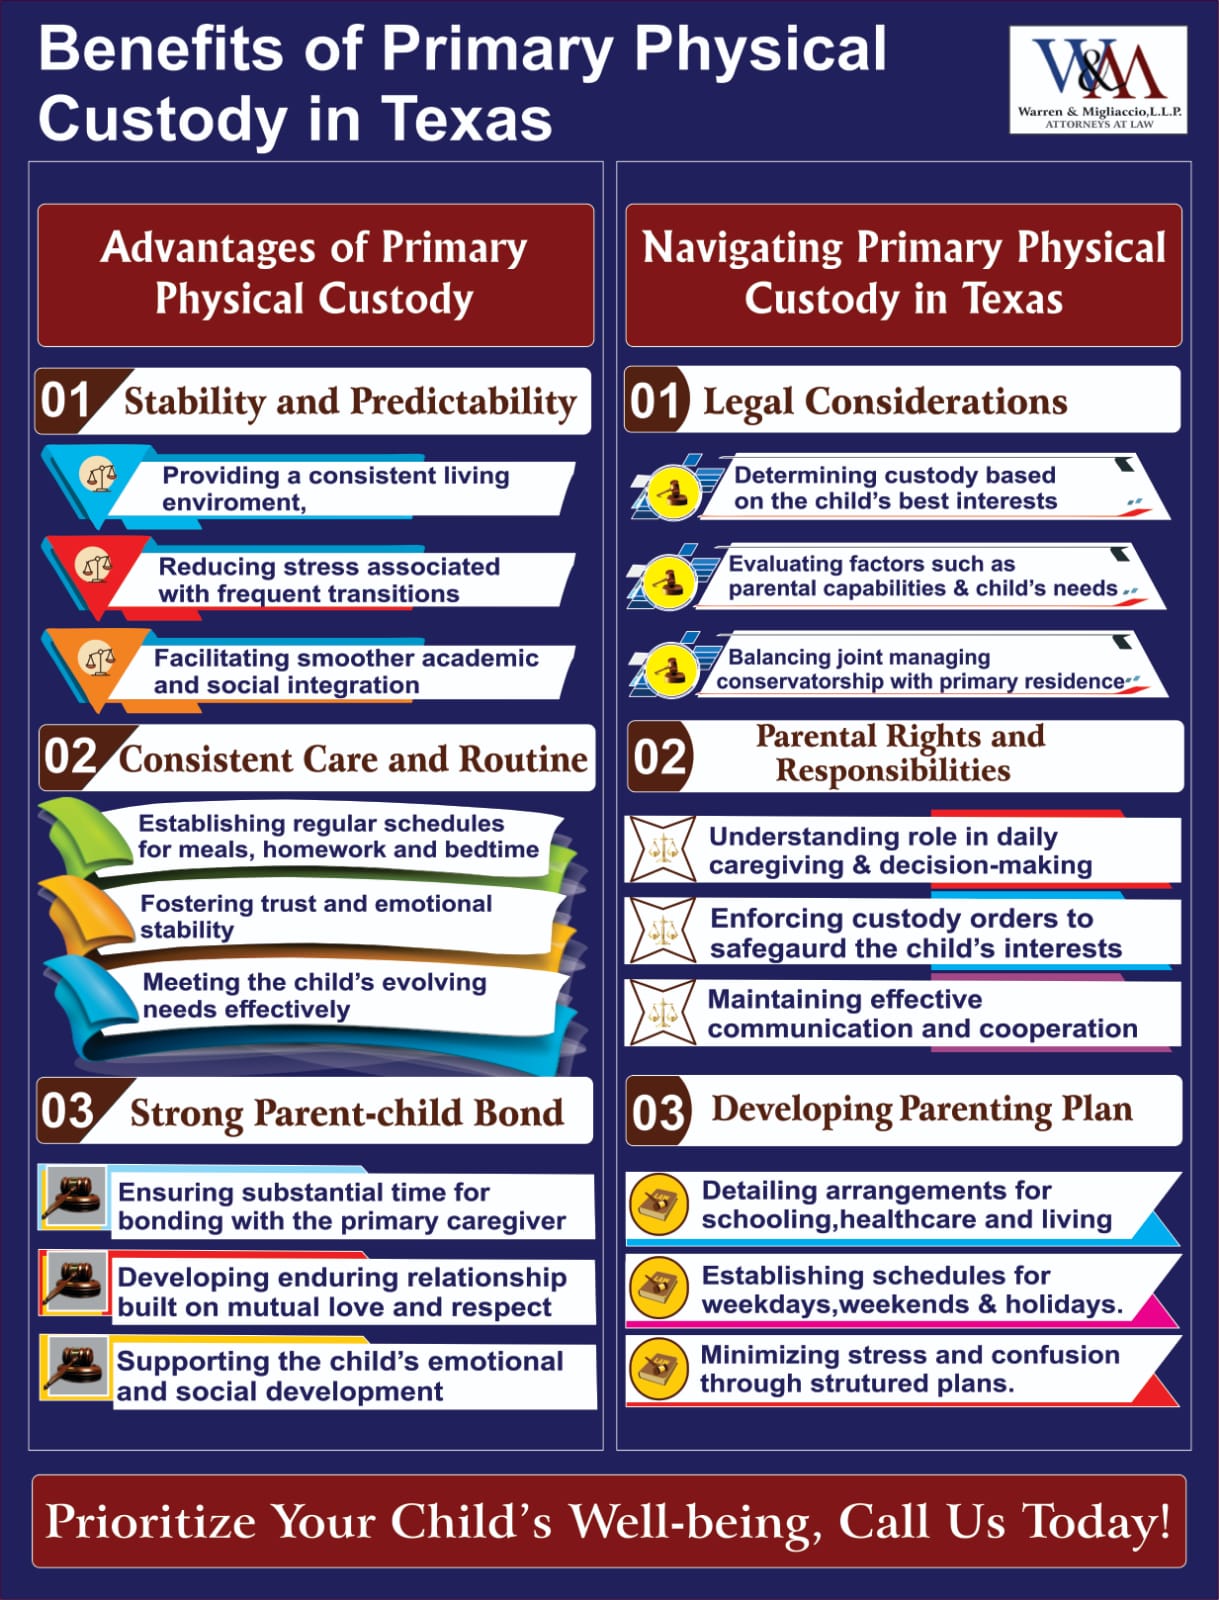 An infographic showcasing the benefits of primary physical custody for a child in Texas, provided by a family law firm.